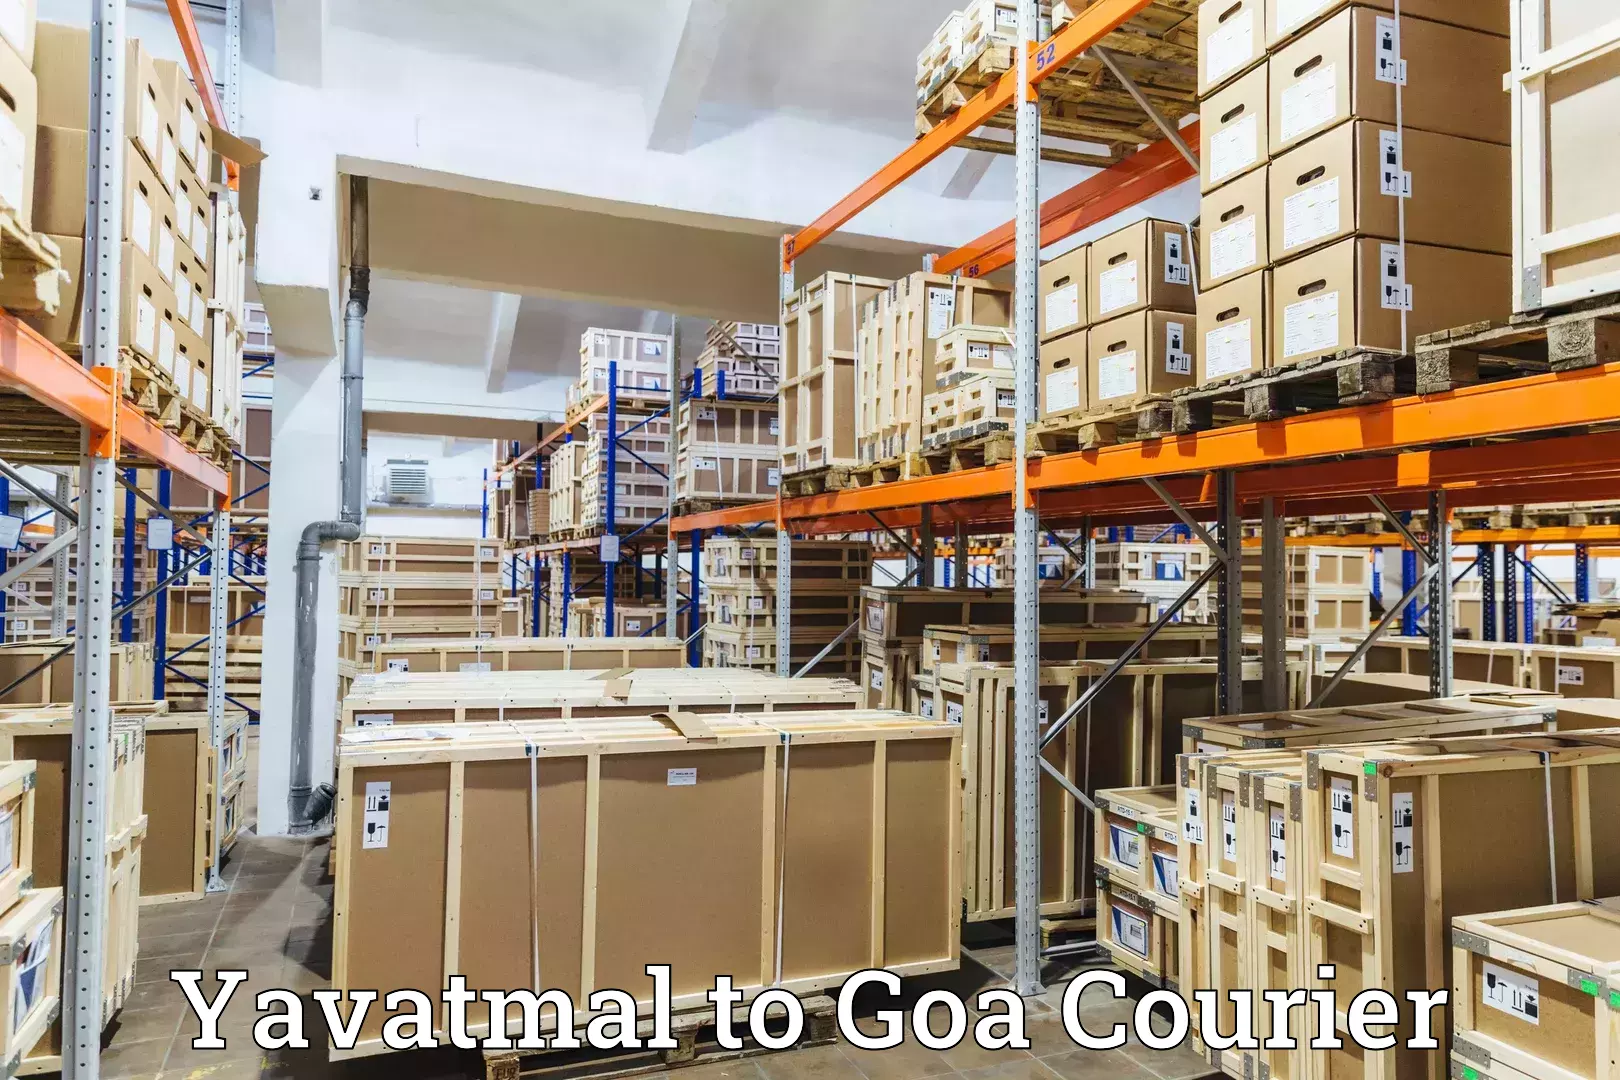 State-of-the-art courier technology Yavatmal to Mormugao Port